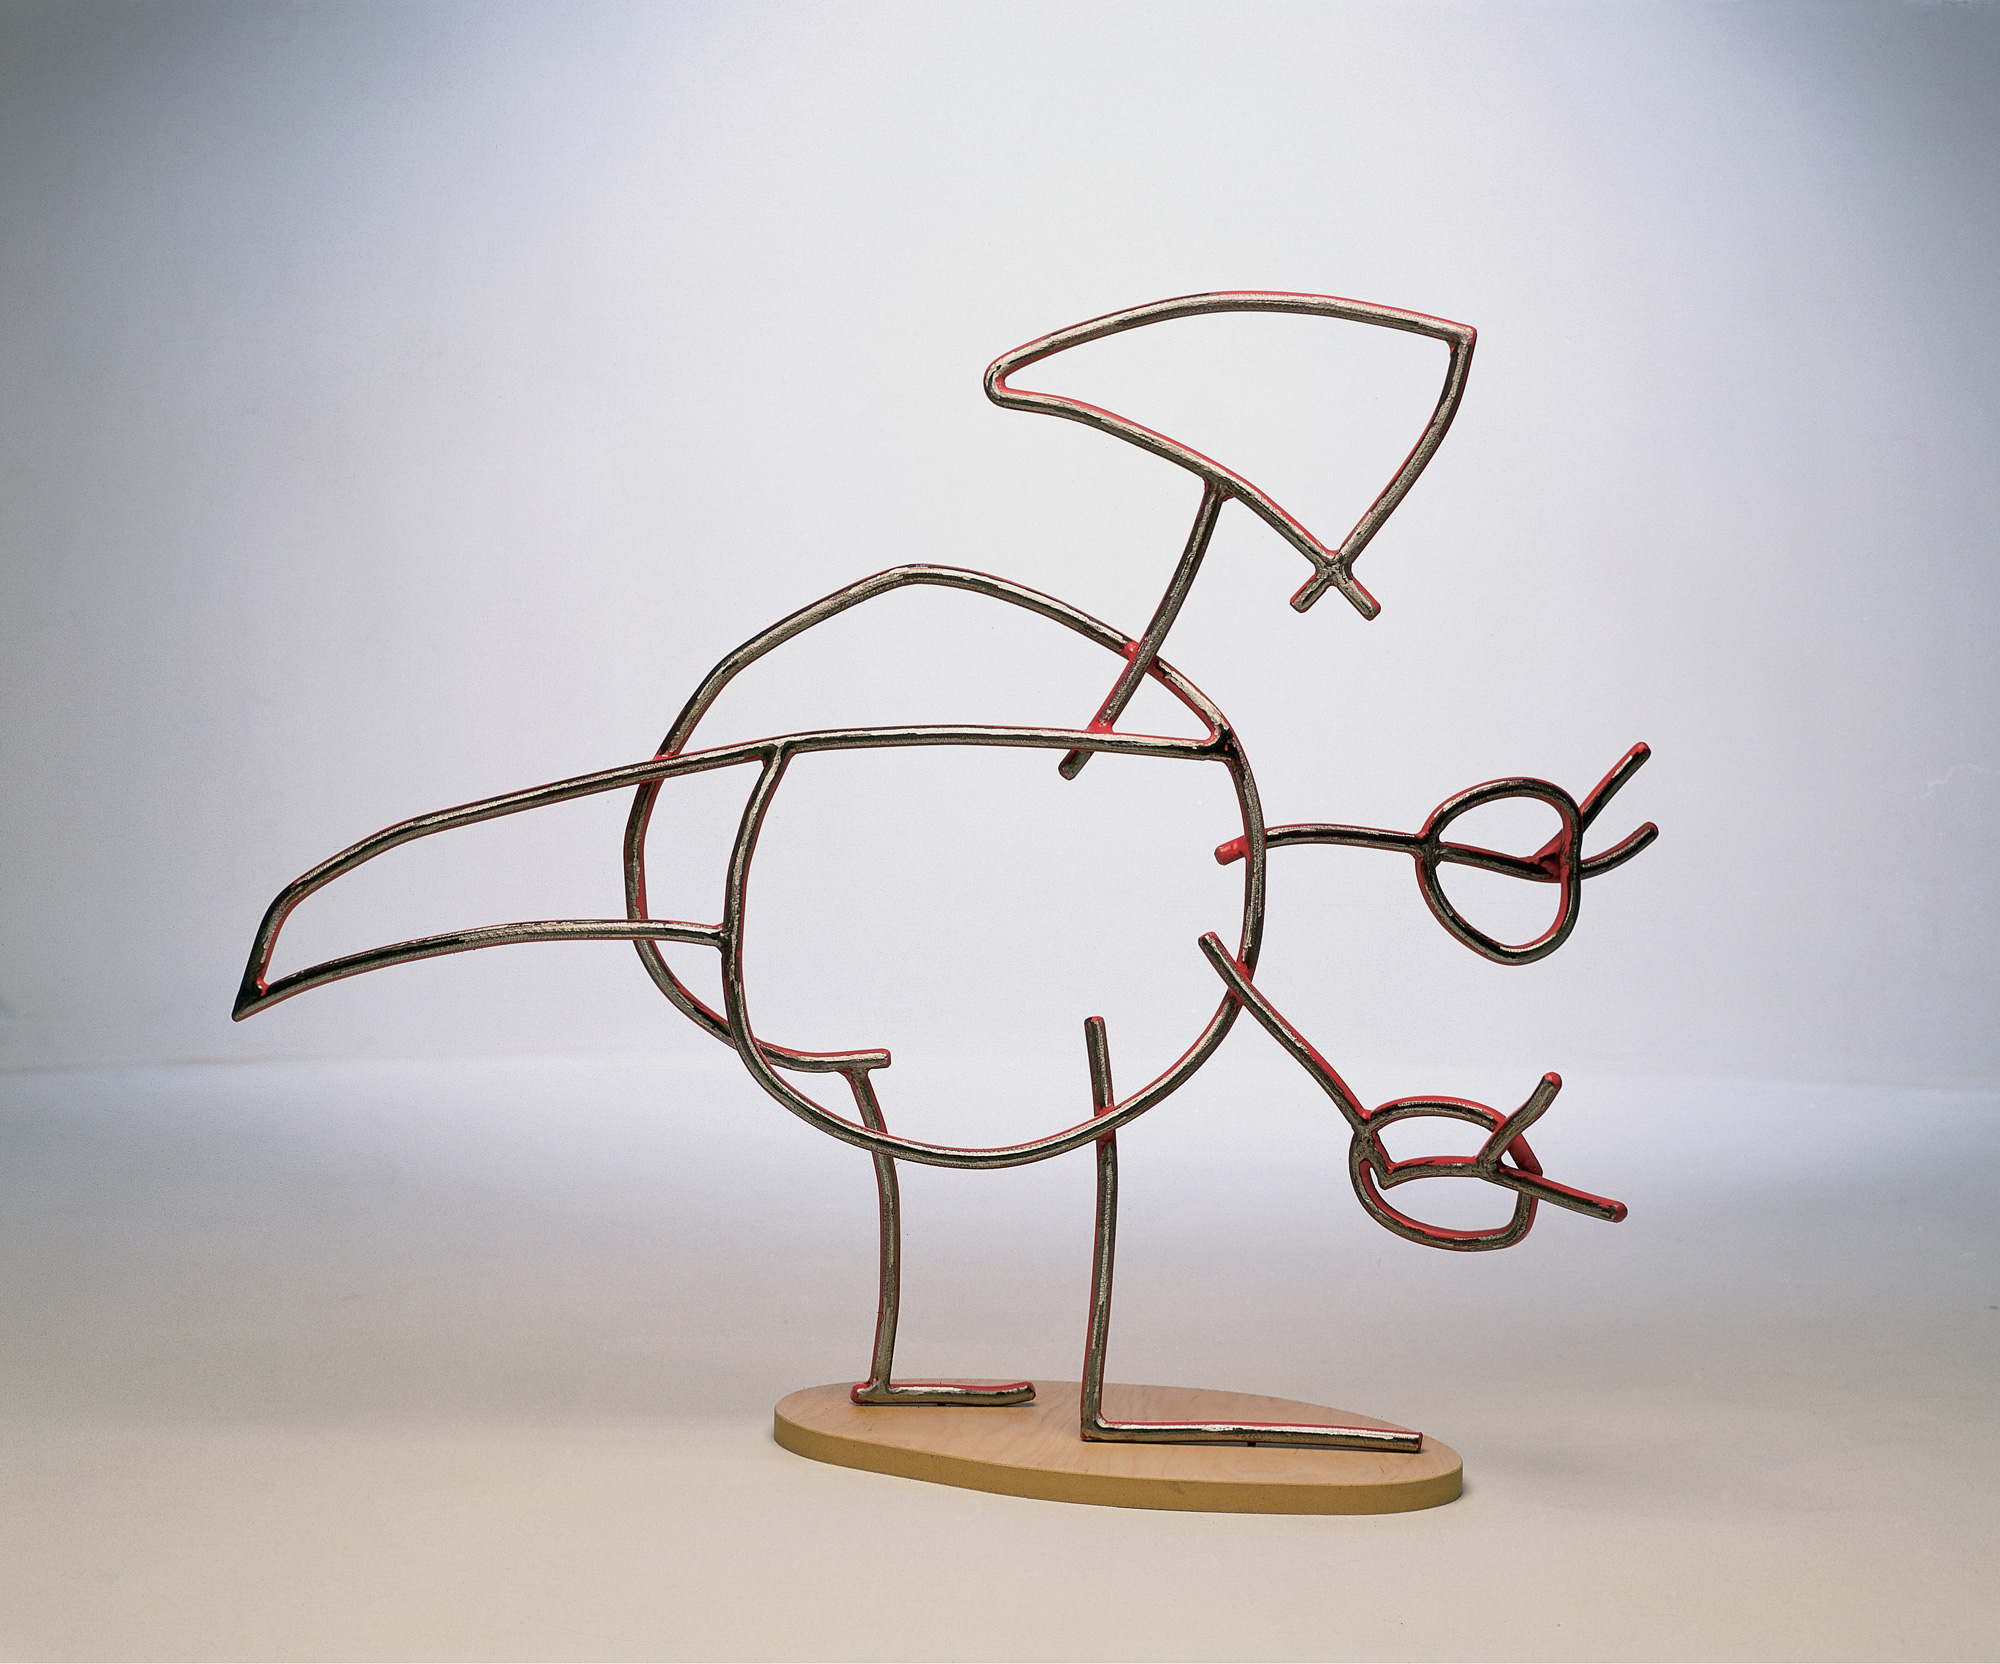 A photograph of Billy's drawing made into a sculpture by his father Christo.